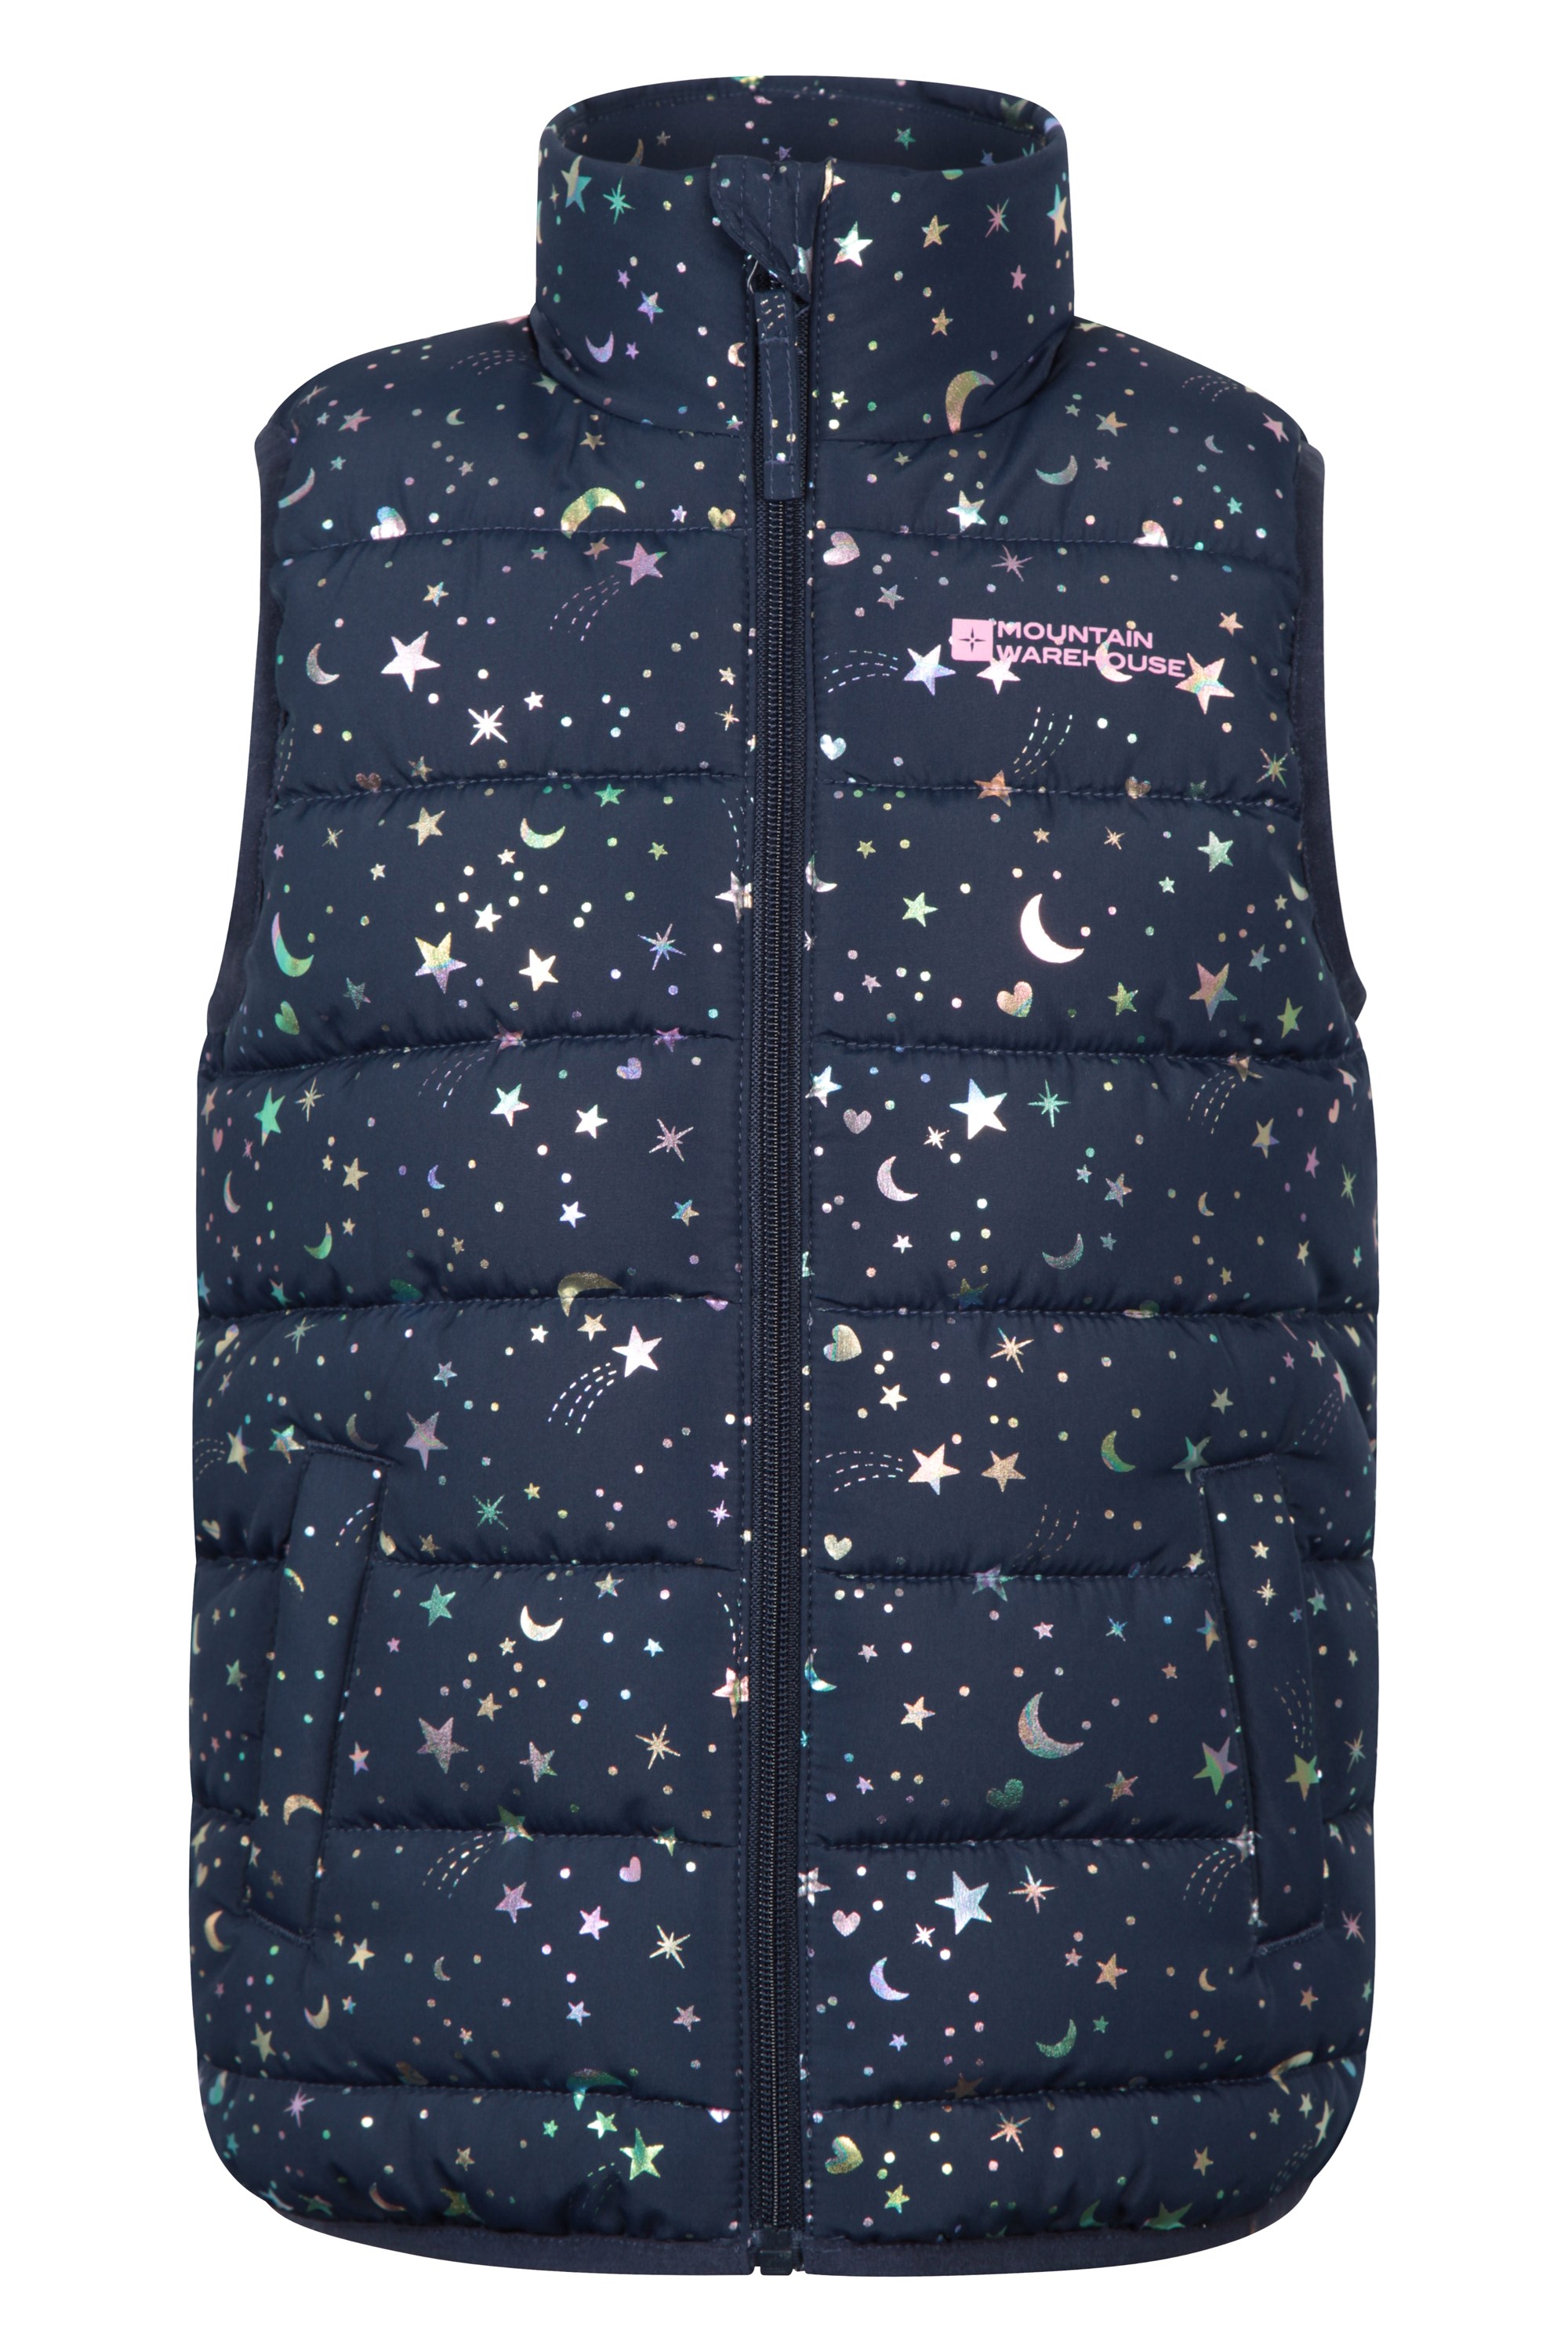 Playshoes Girls Uni Quilted Vest Gilet 